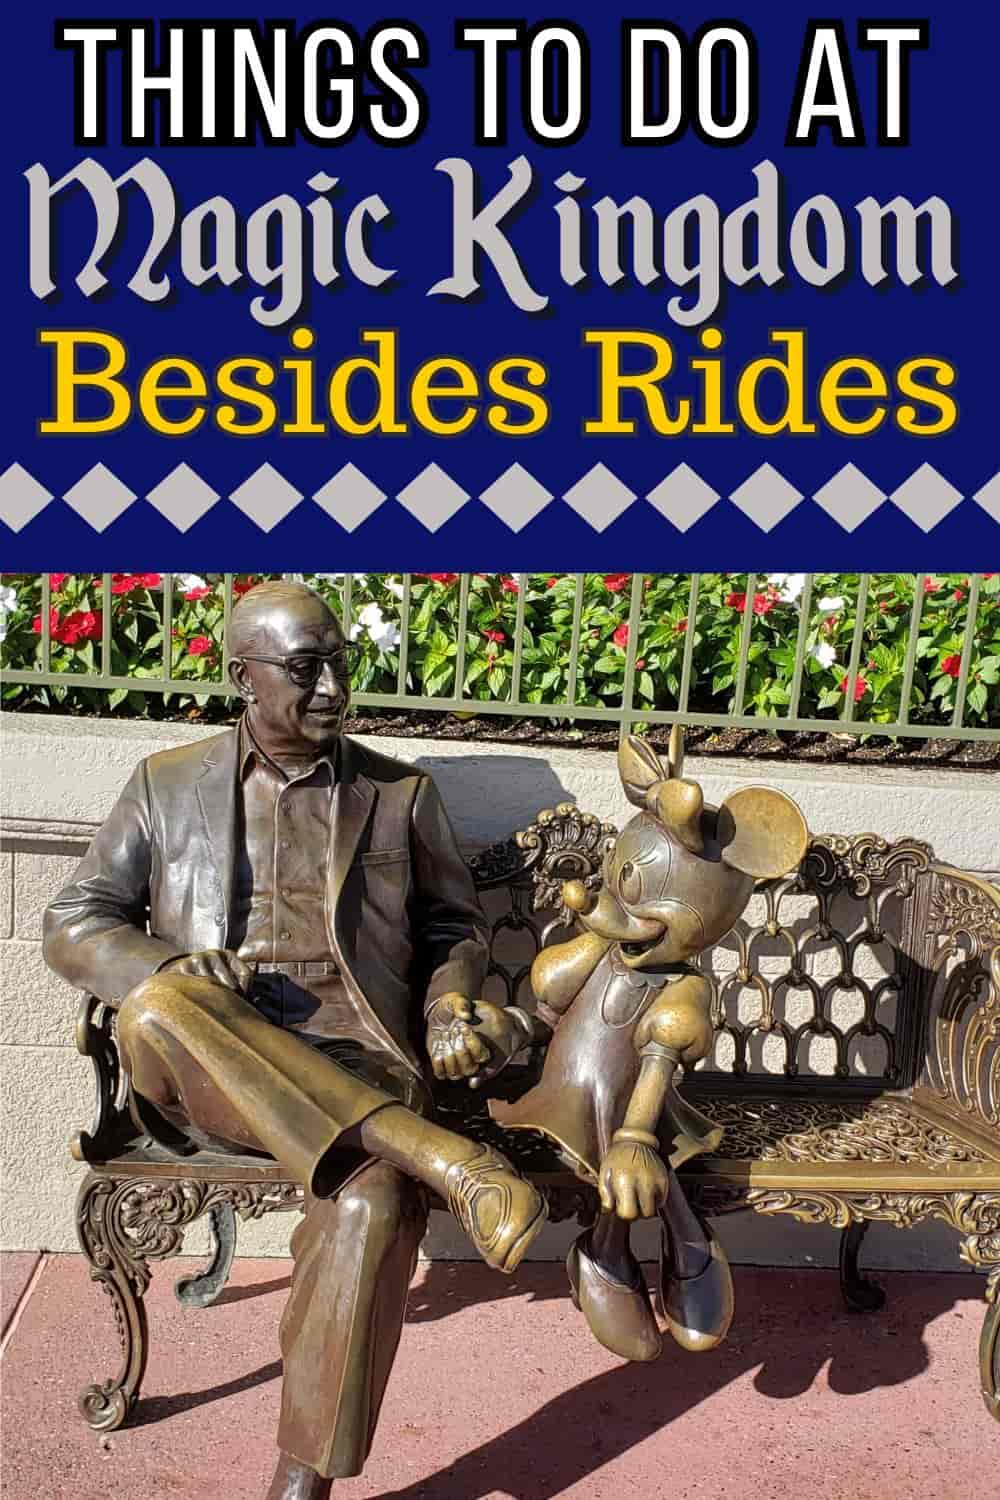 Best Things to do at Magic Kingdom Besides Rides